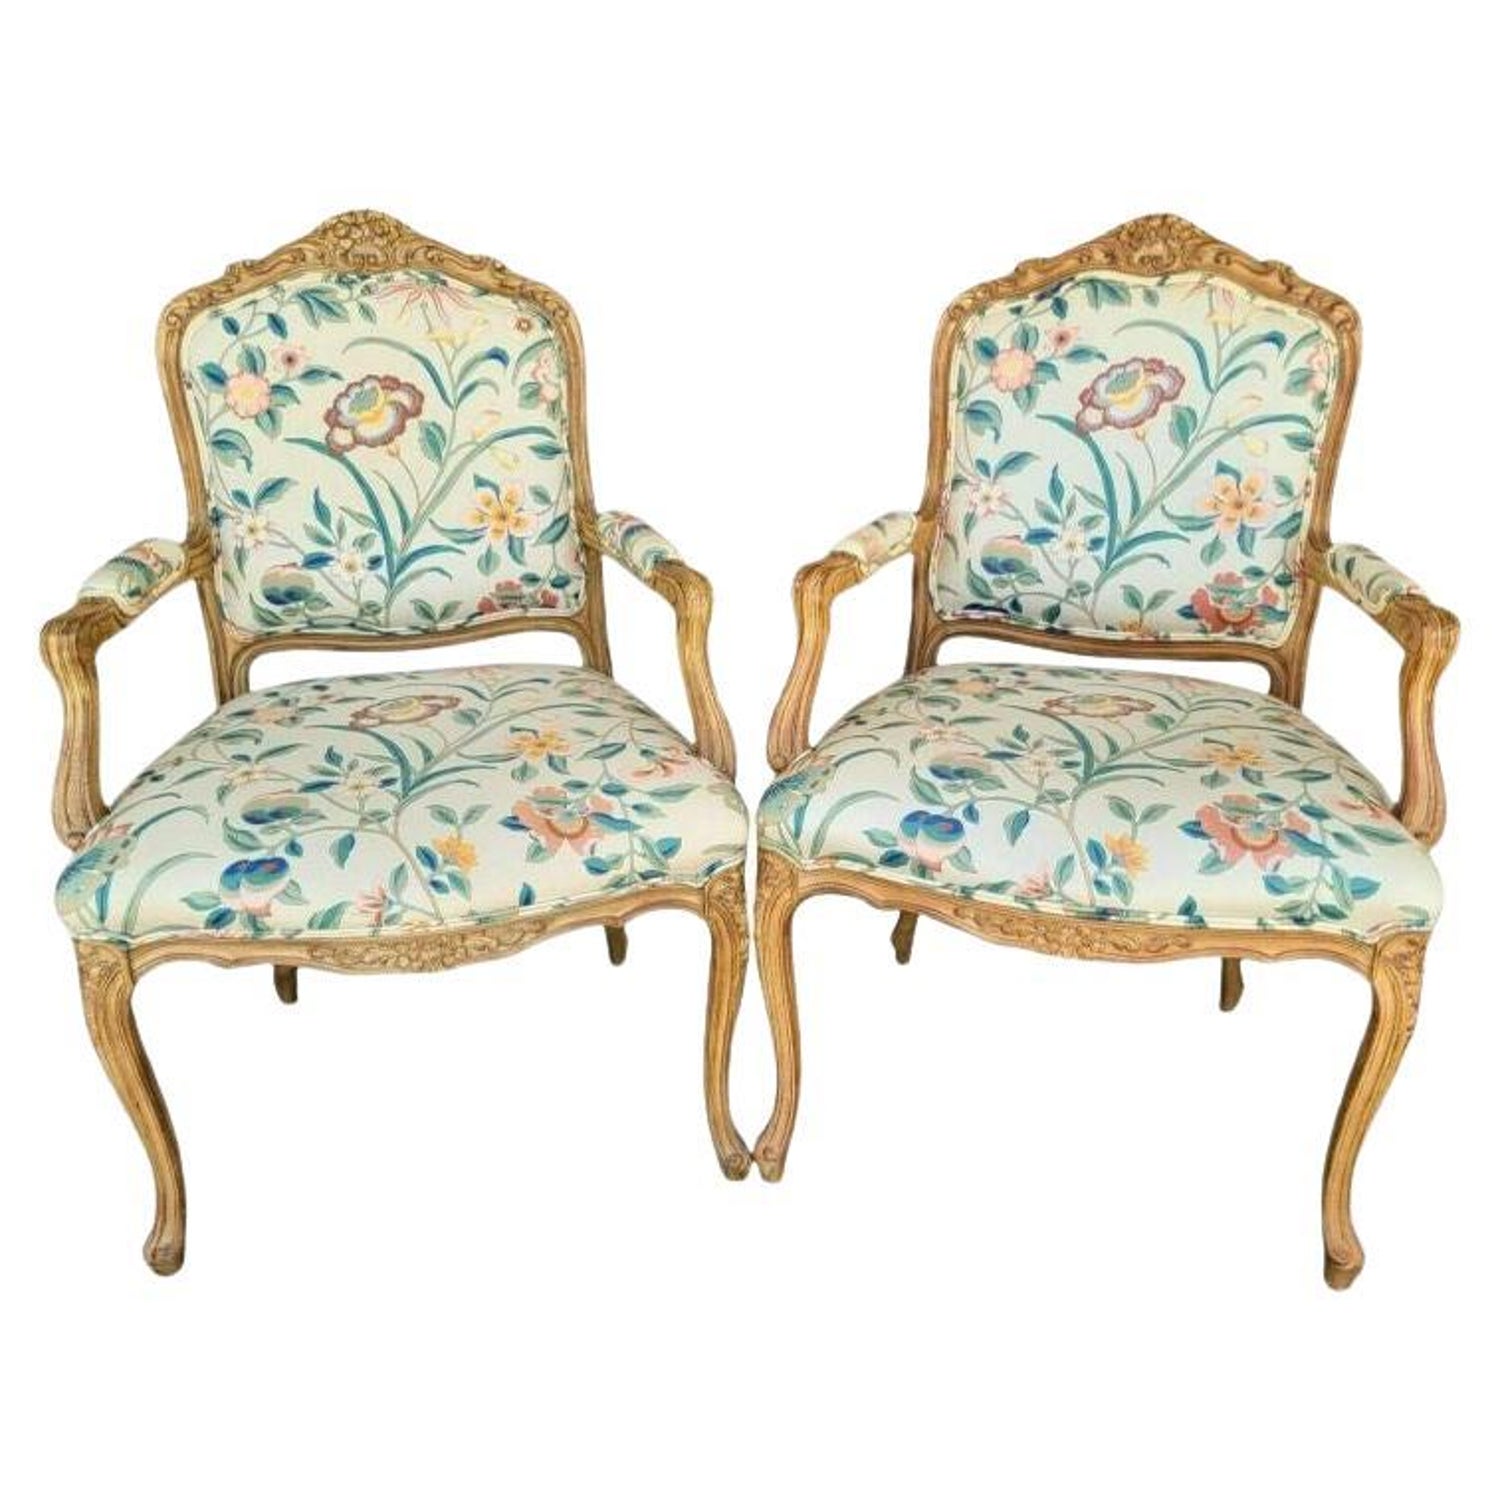 Chateau d'Ax Seating - 5 For Sale at 1stDibs